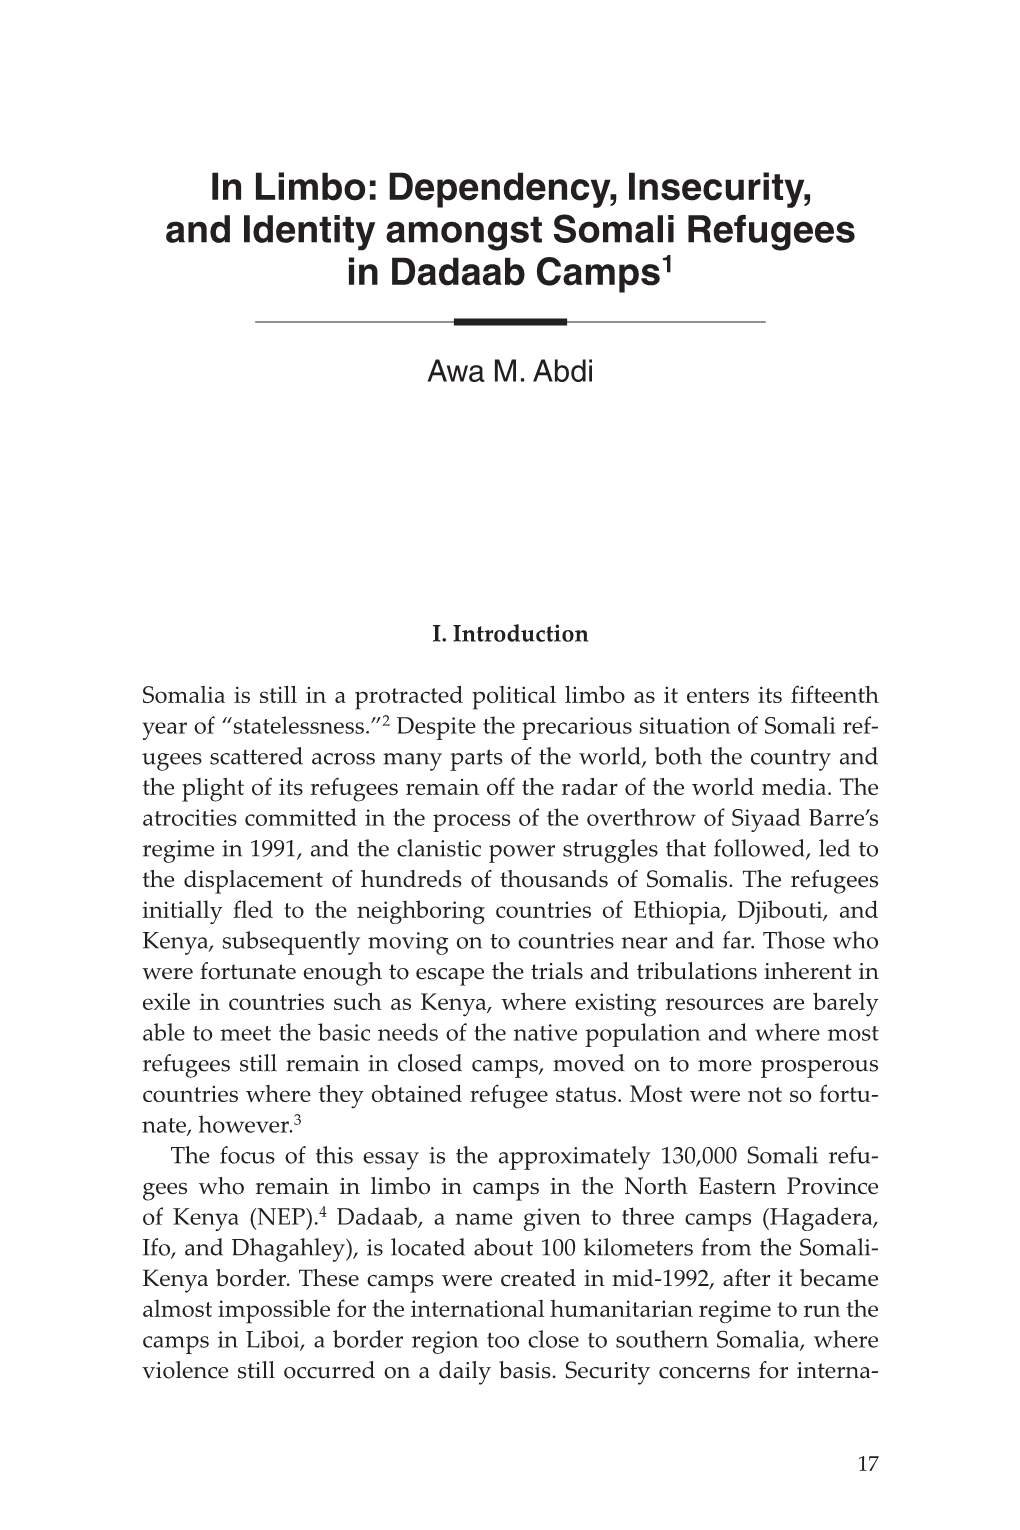 In Limbo: Dependency, Insecurity, and Identity Amongst Somali Refugees in Dadaab Camps1